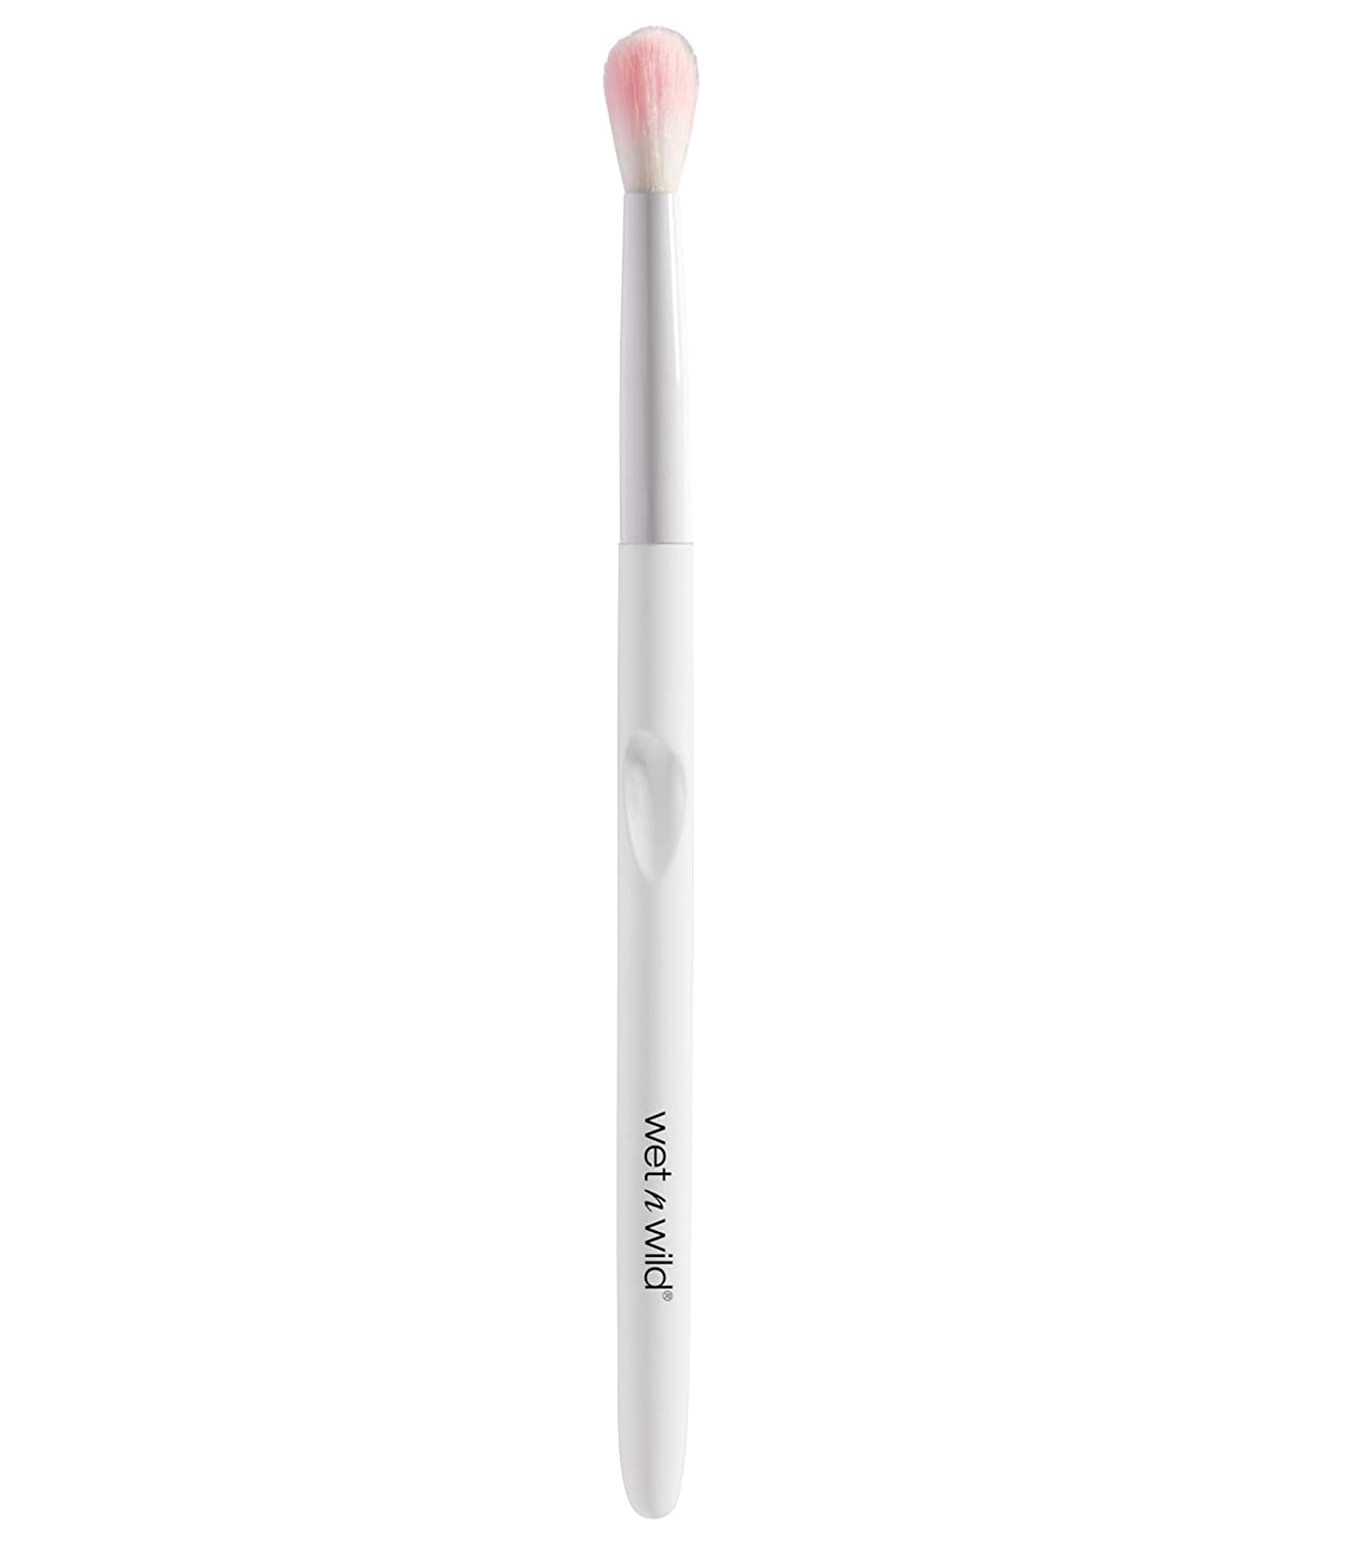 A small makeup brush on a plain background